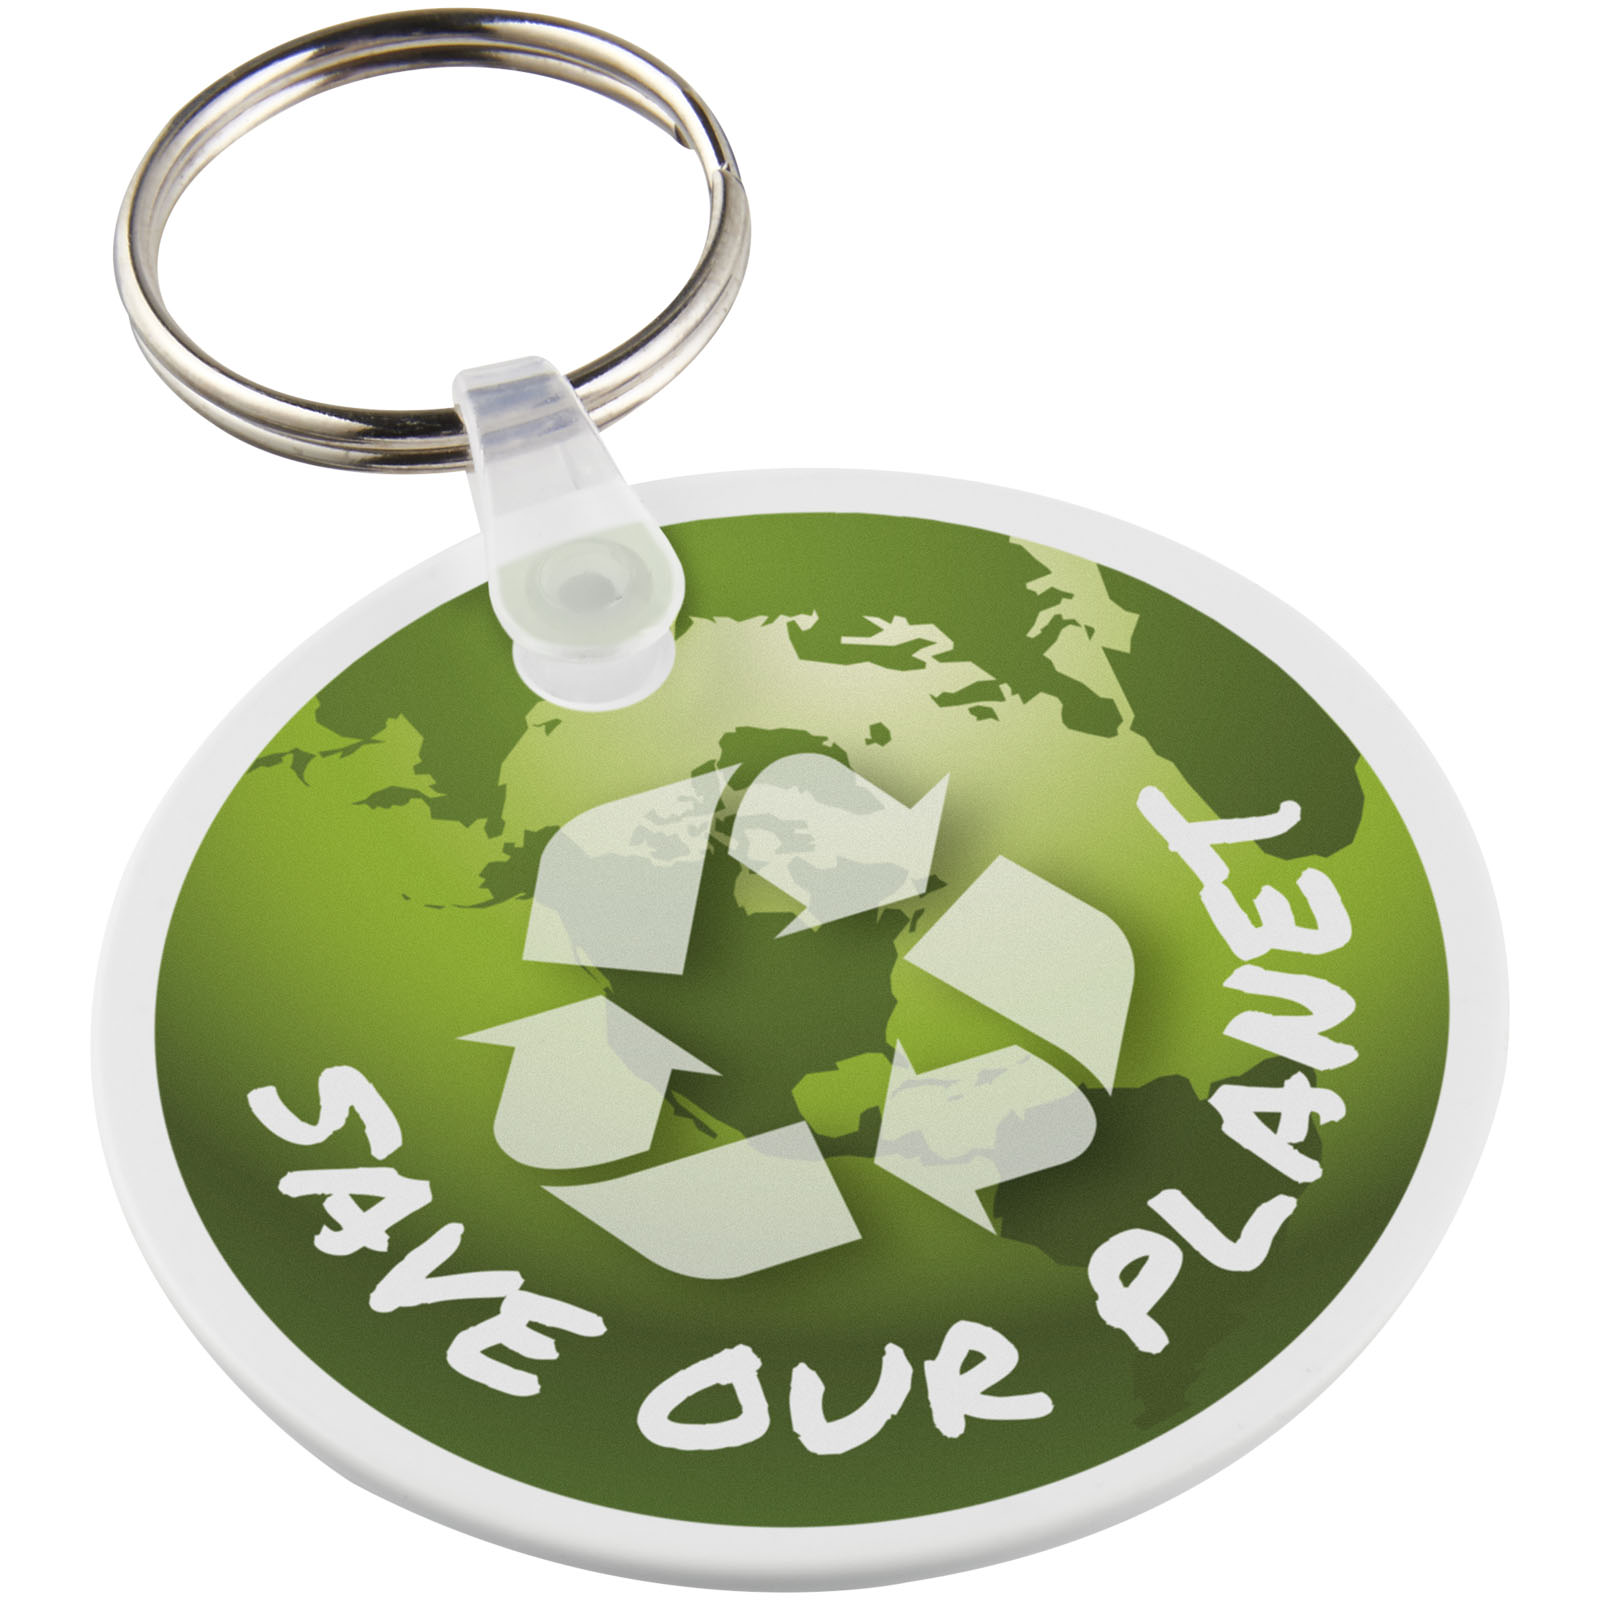 Advertising Keychains & Keyrings - Tait circle-shaped recycled keychain - 0